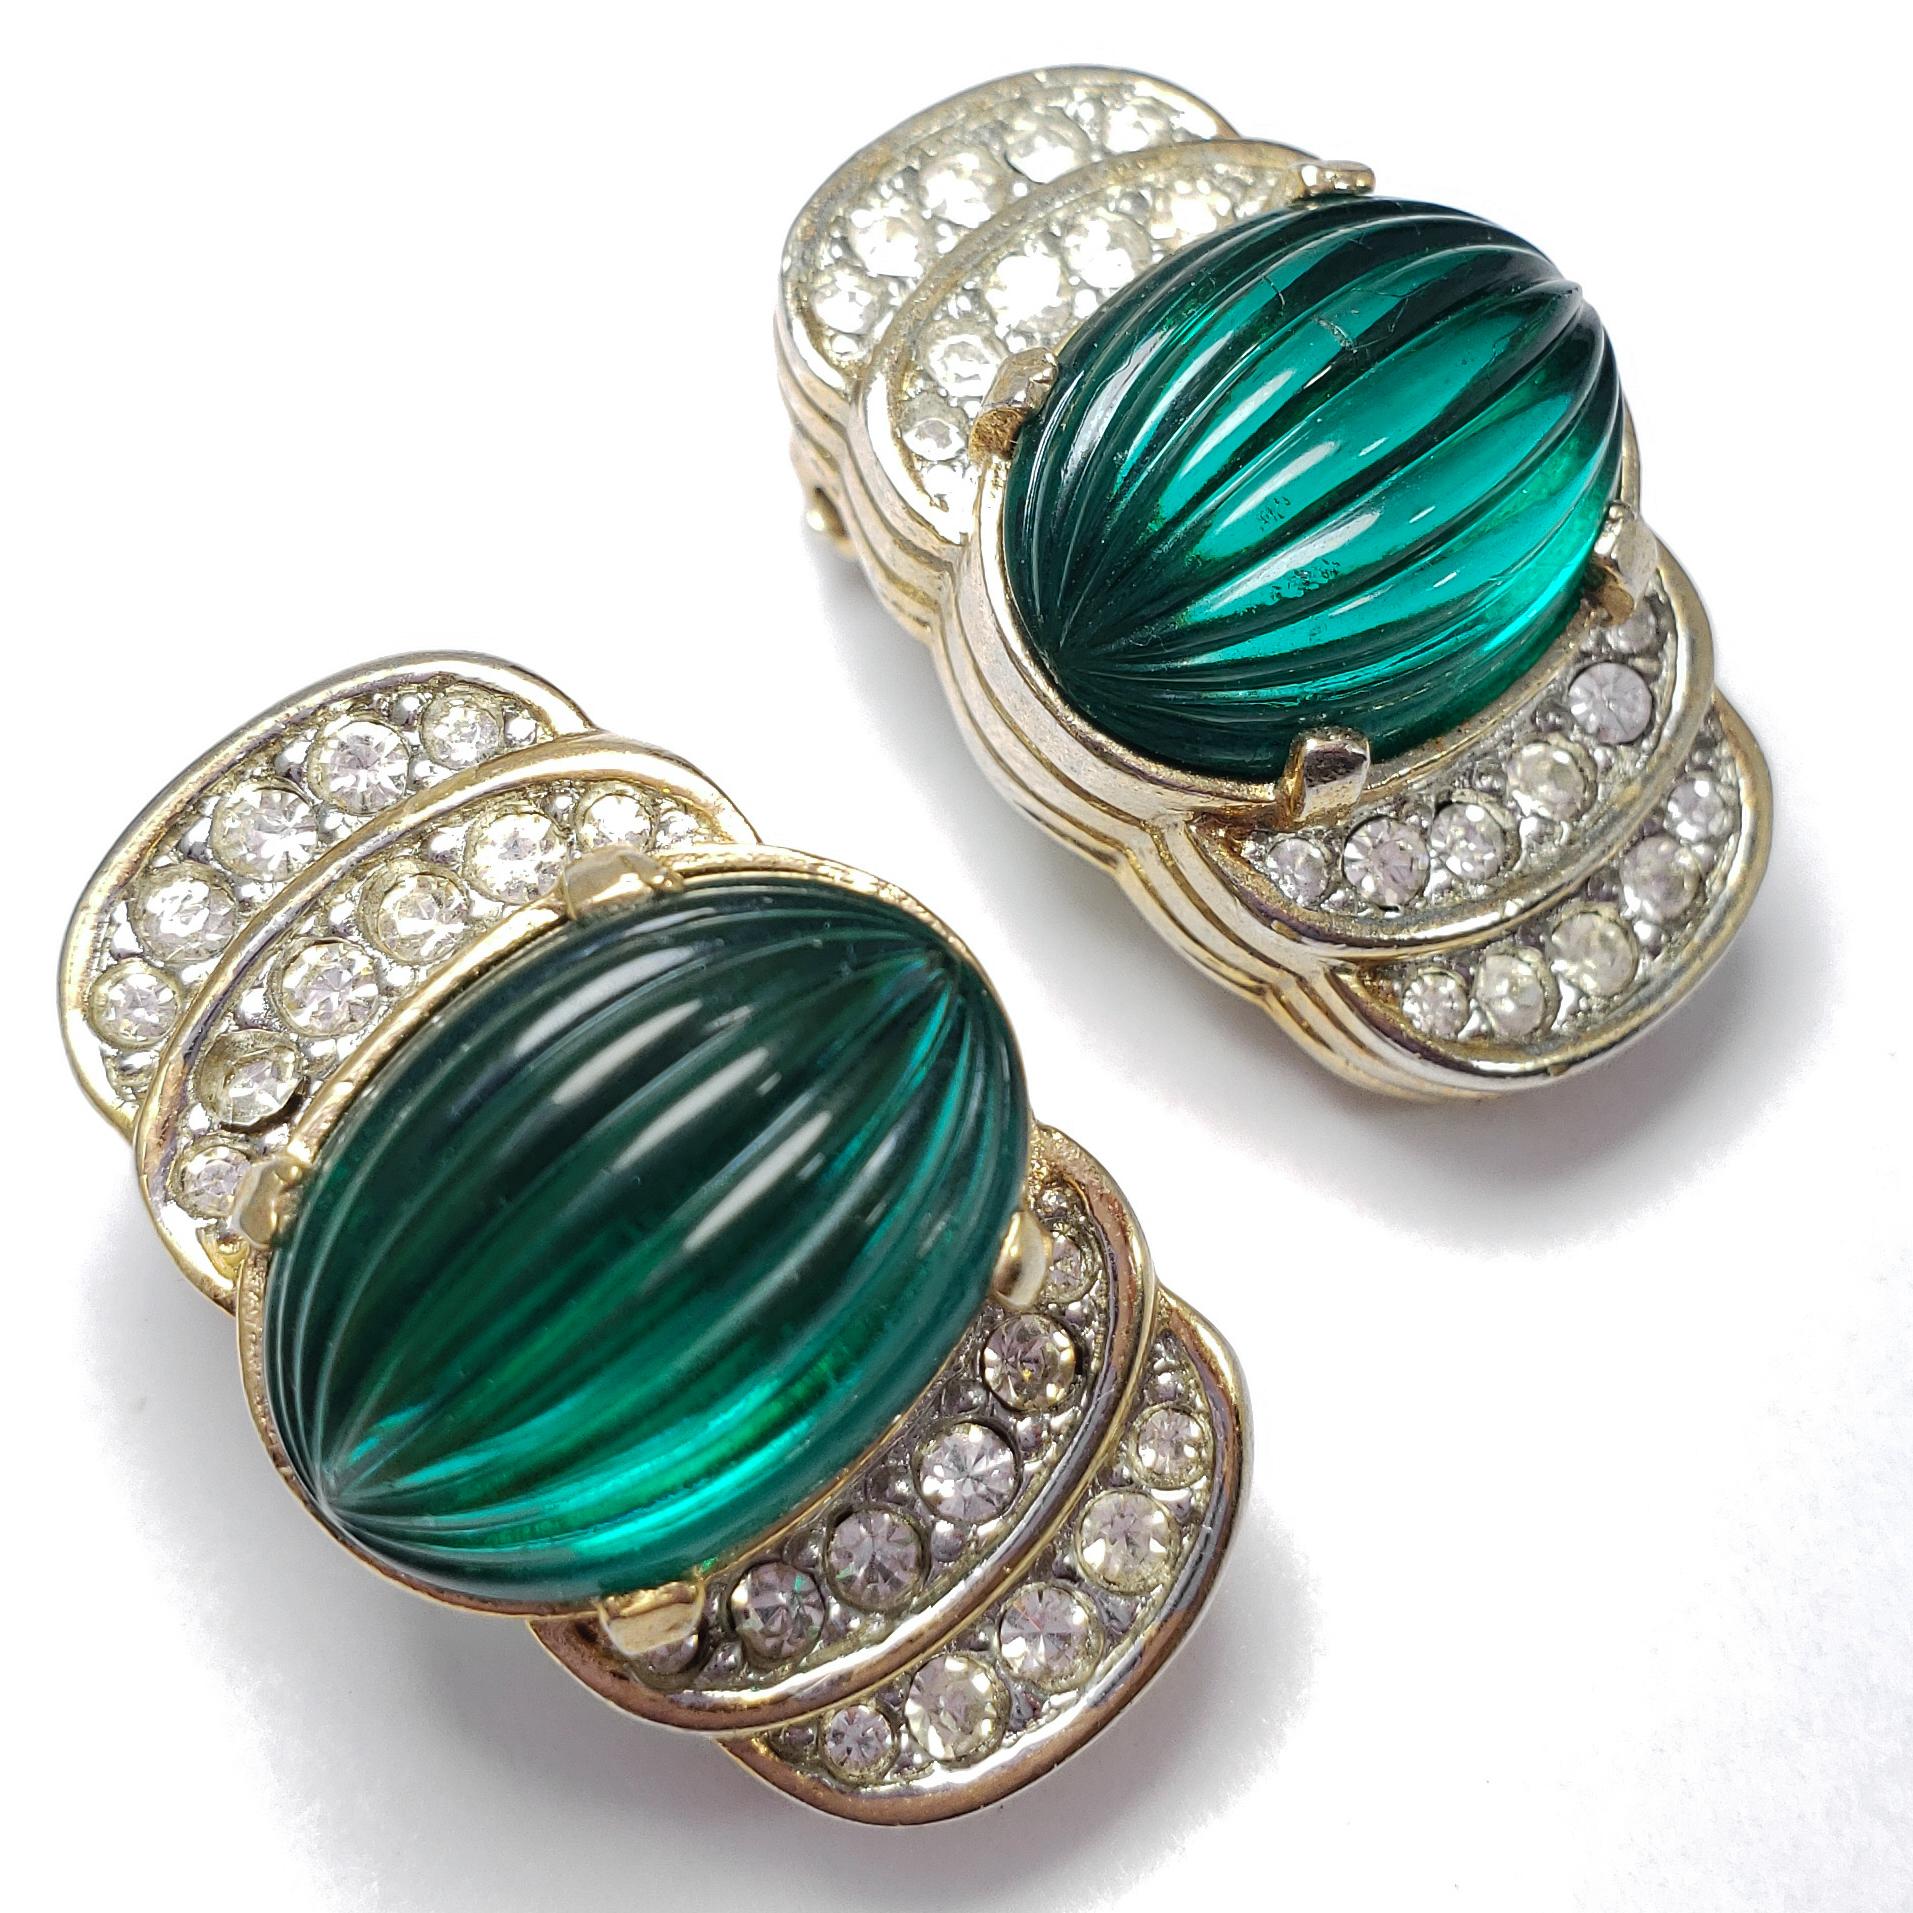 A luxurious pair of art-deco clip-on earring. Each features a single carved green crystal, accented with smaller clear stones. Set on gold-tone metal.

